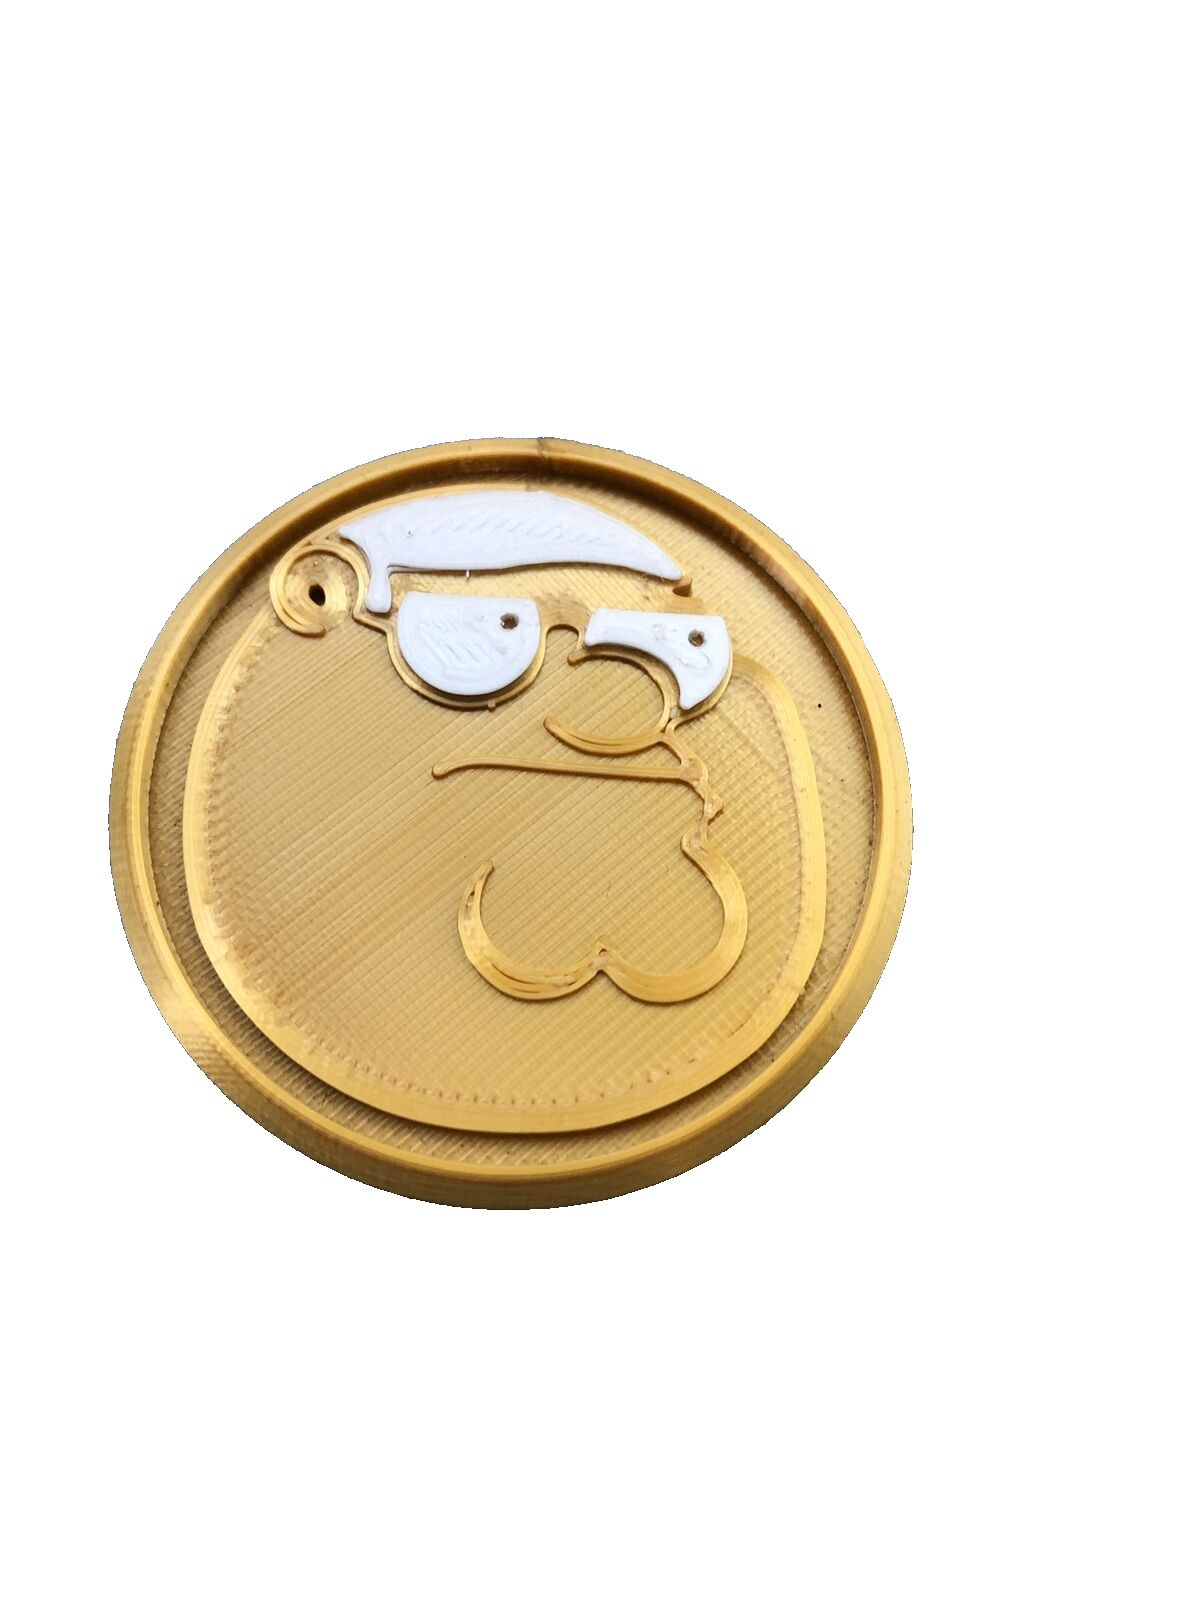 Fortnite Peter Griffin Medallion Coin Collectable